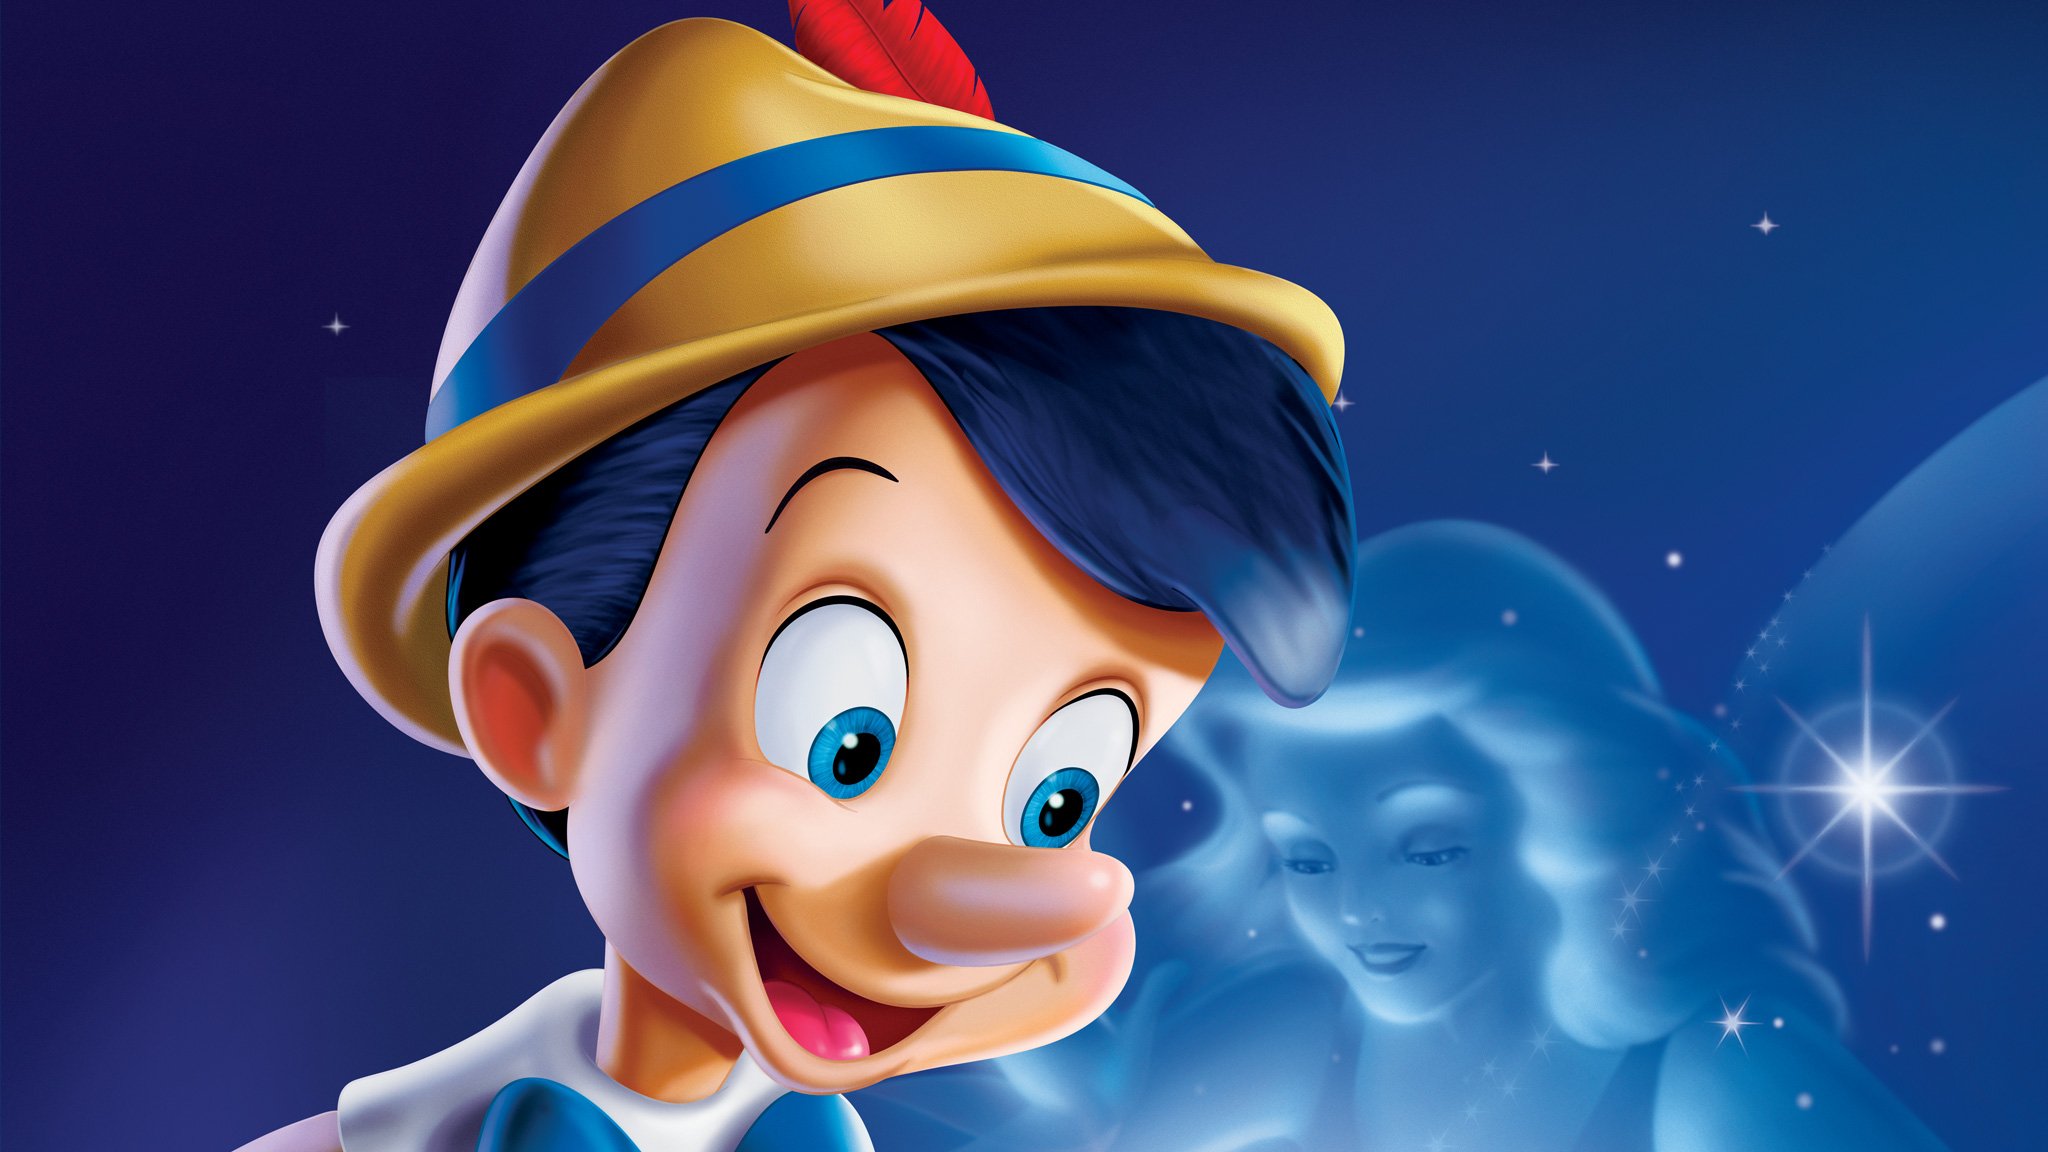 Pinocchio Puppet Disney Comedy Family Animation Fantasy - Pinocchio Hd , HD Wallpaper & Backgrounds